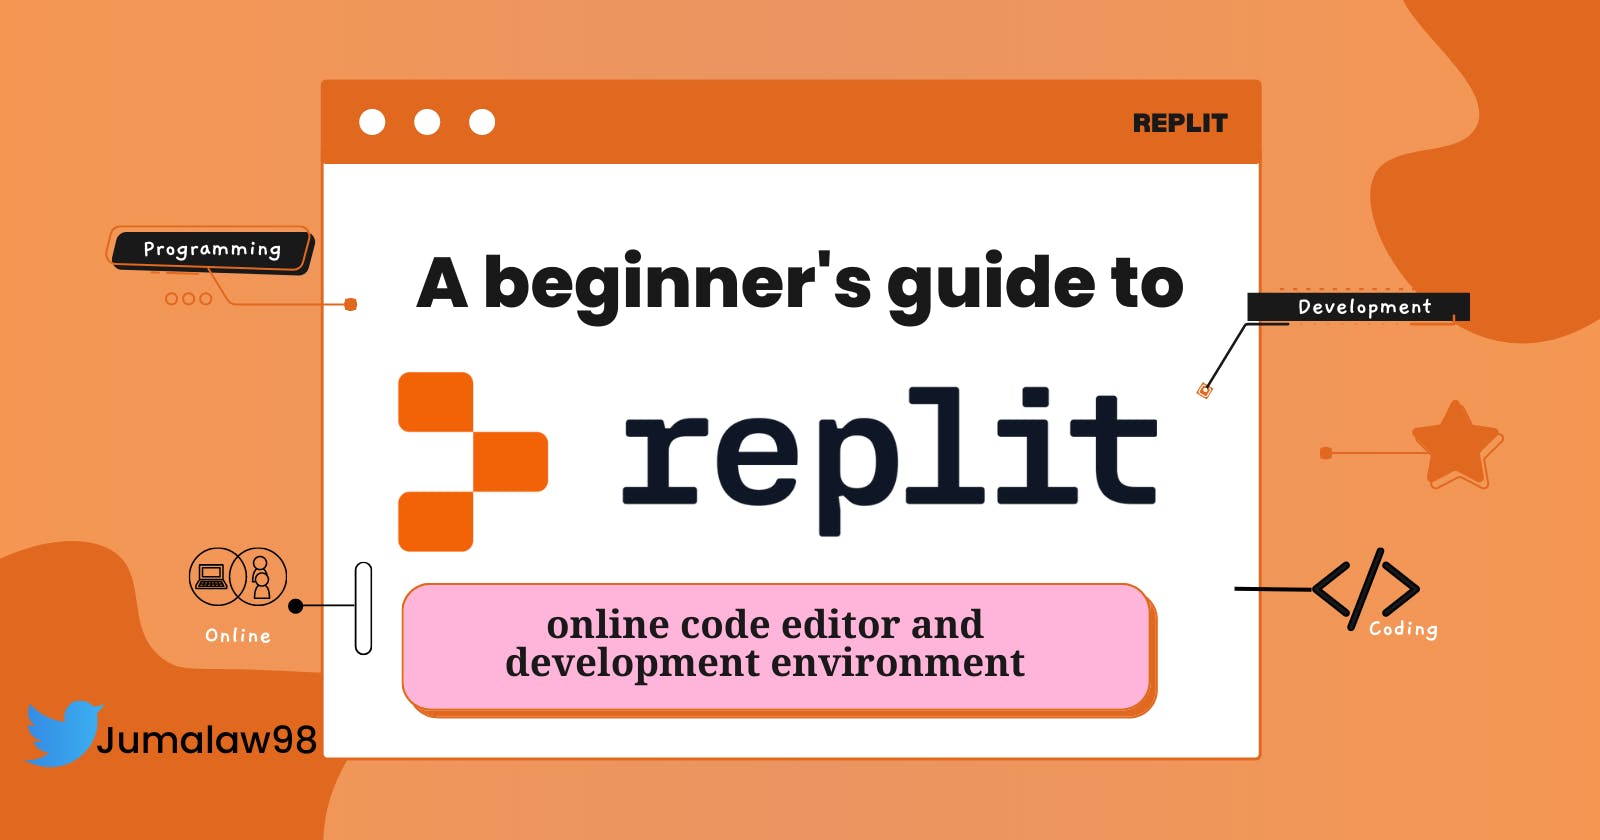 A beginner's guide to using Replit’s online code editor and development environment